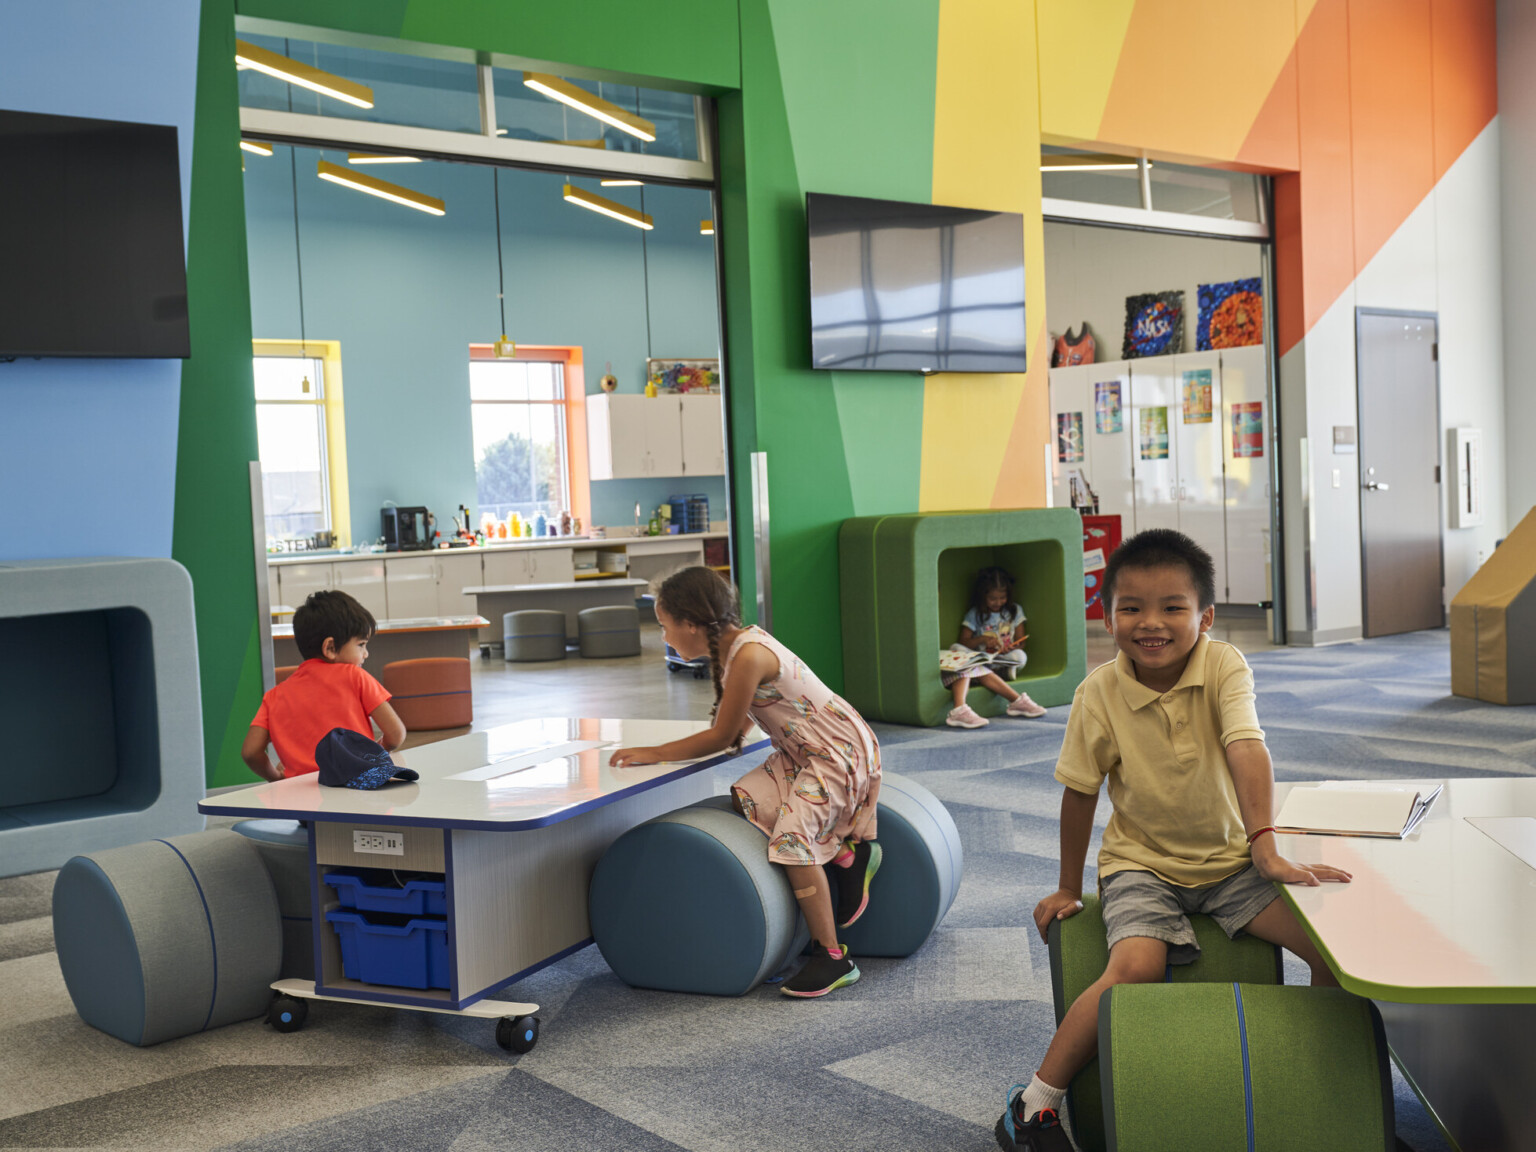 Children in classroom with brightly painted walls, modern aesthetic, vaulted ceilings and colorful ergonomic seating arrangement